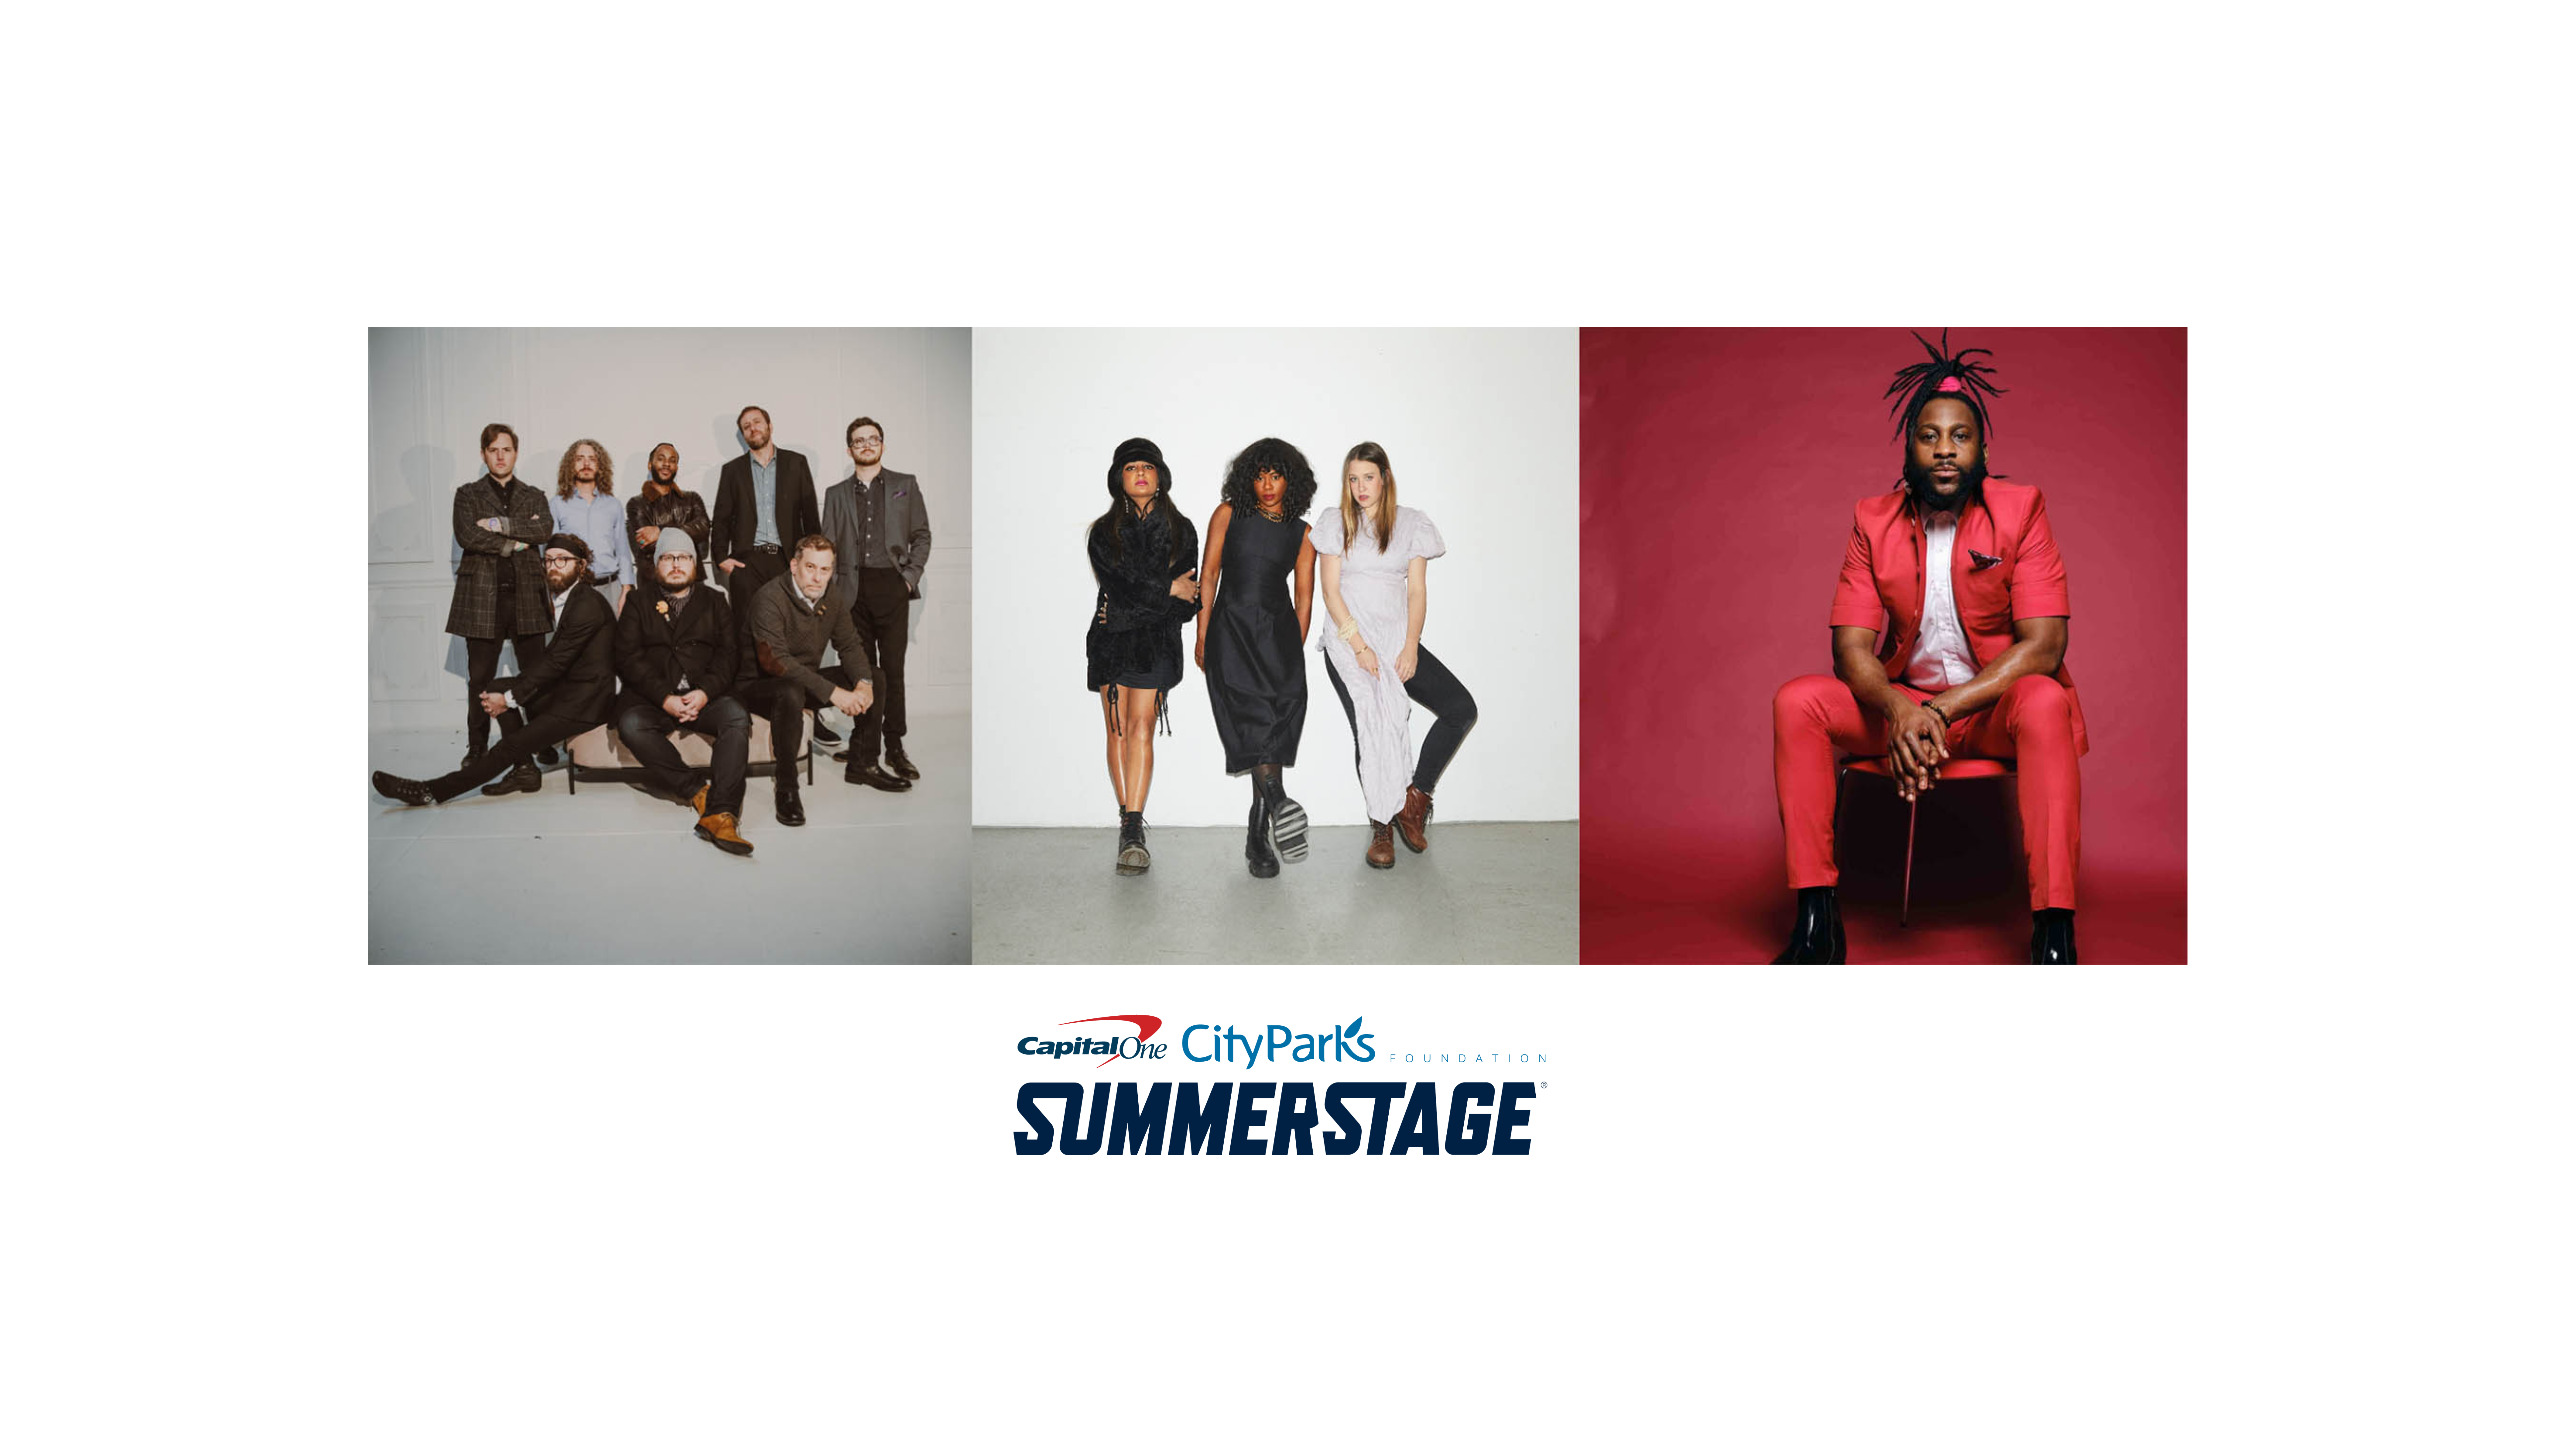 SummerStage Opening Night: St. Paul And The Broken Bones, Say She She, Mwenso & The Shakes, Dj Alisa Ali